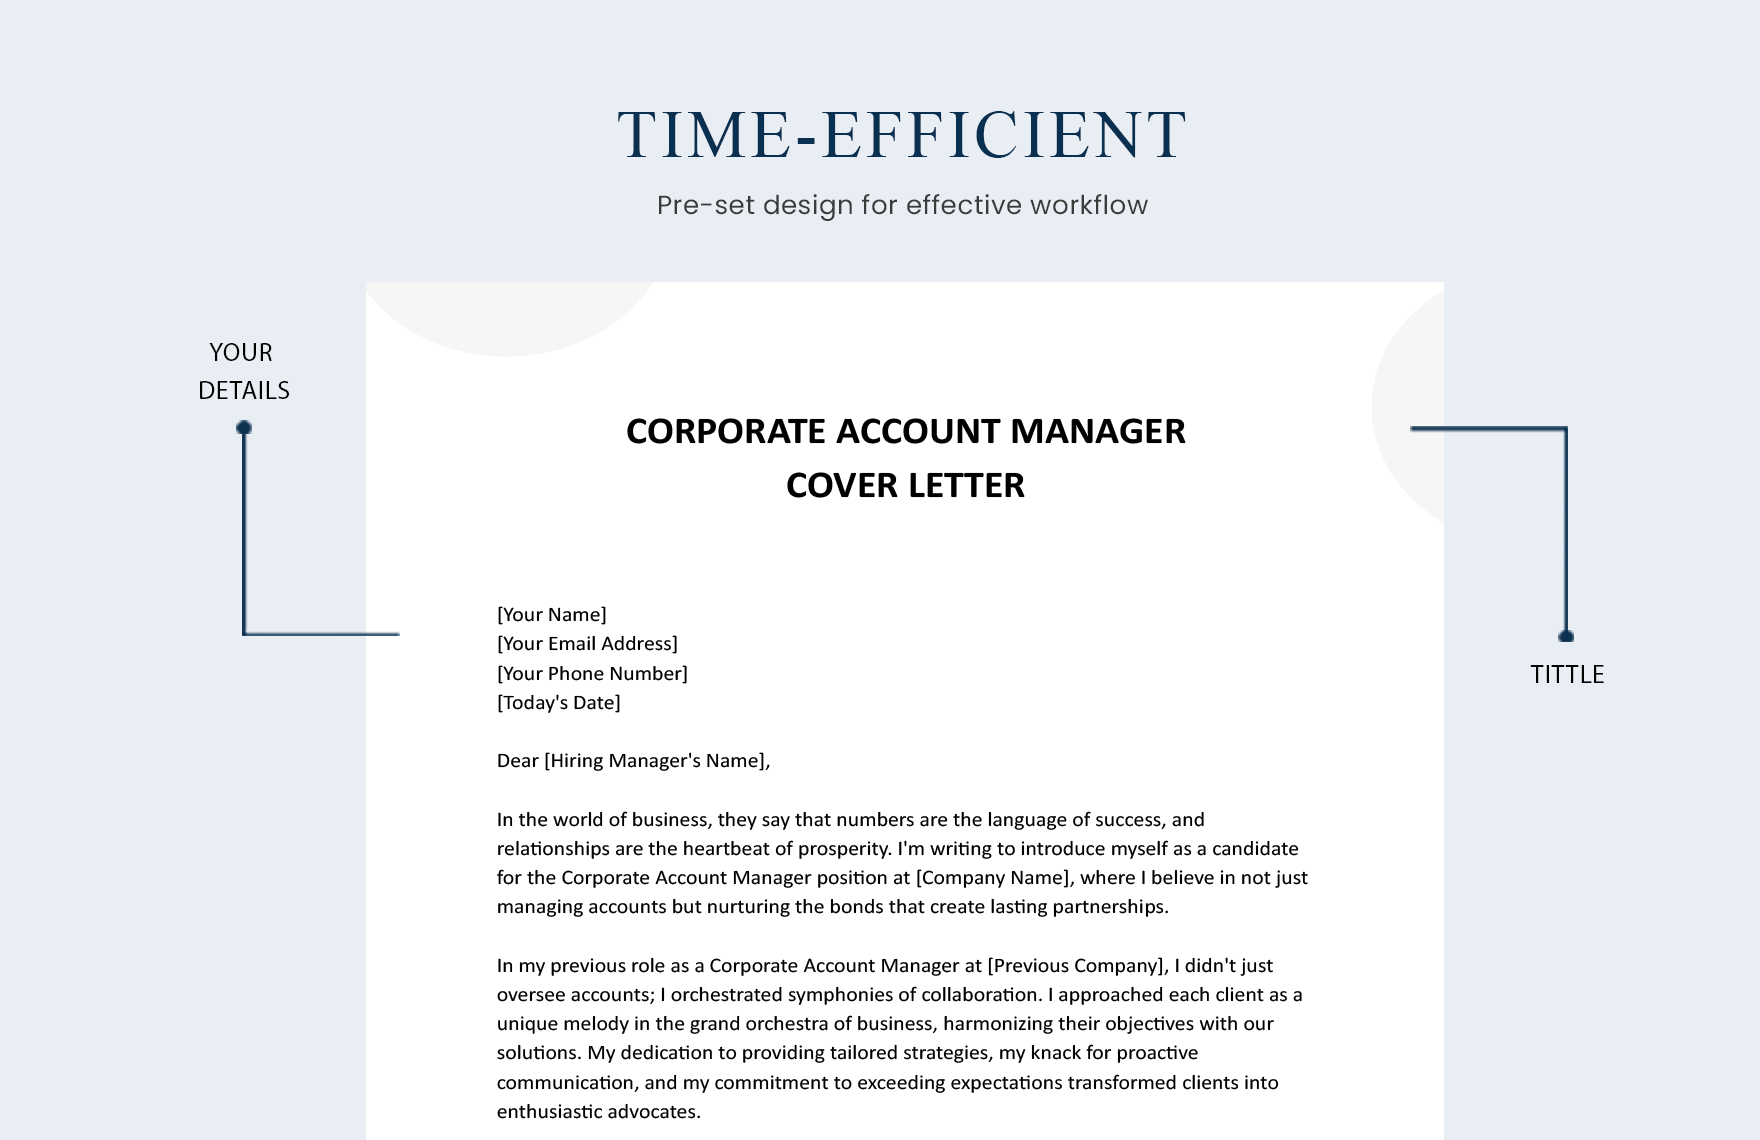 Corporate Account Manager Cover Letter